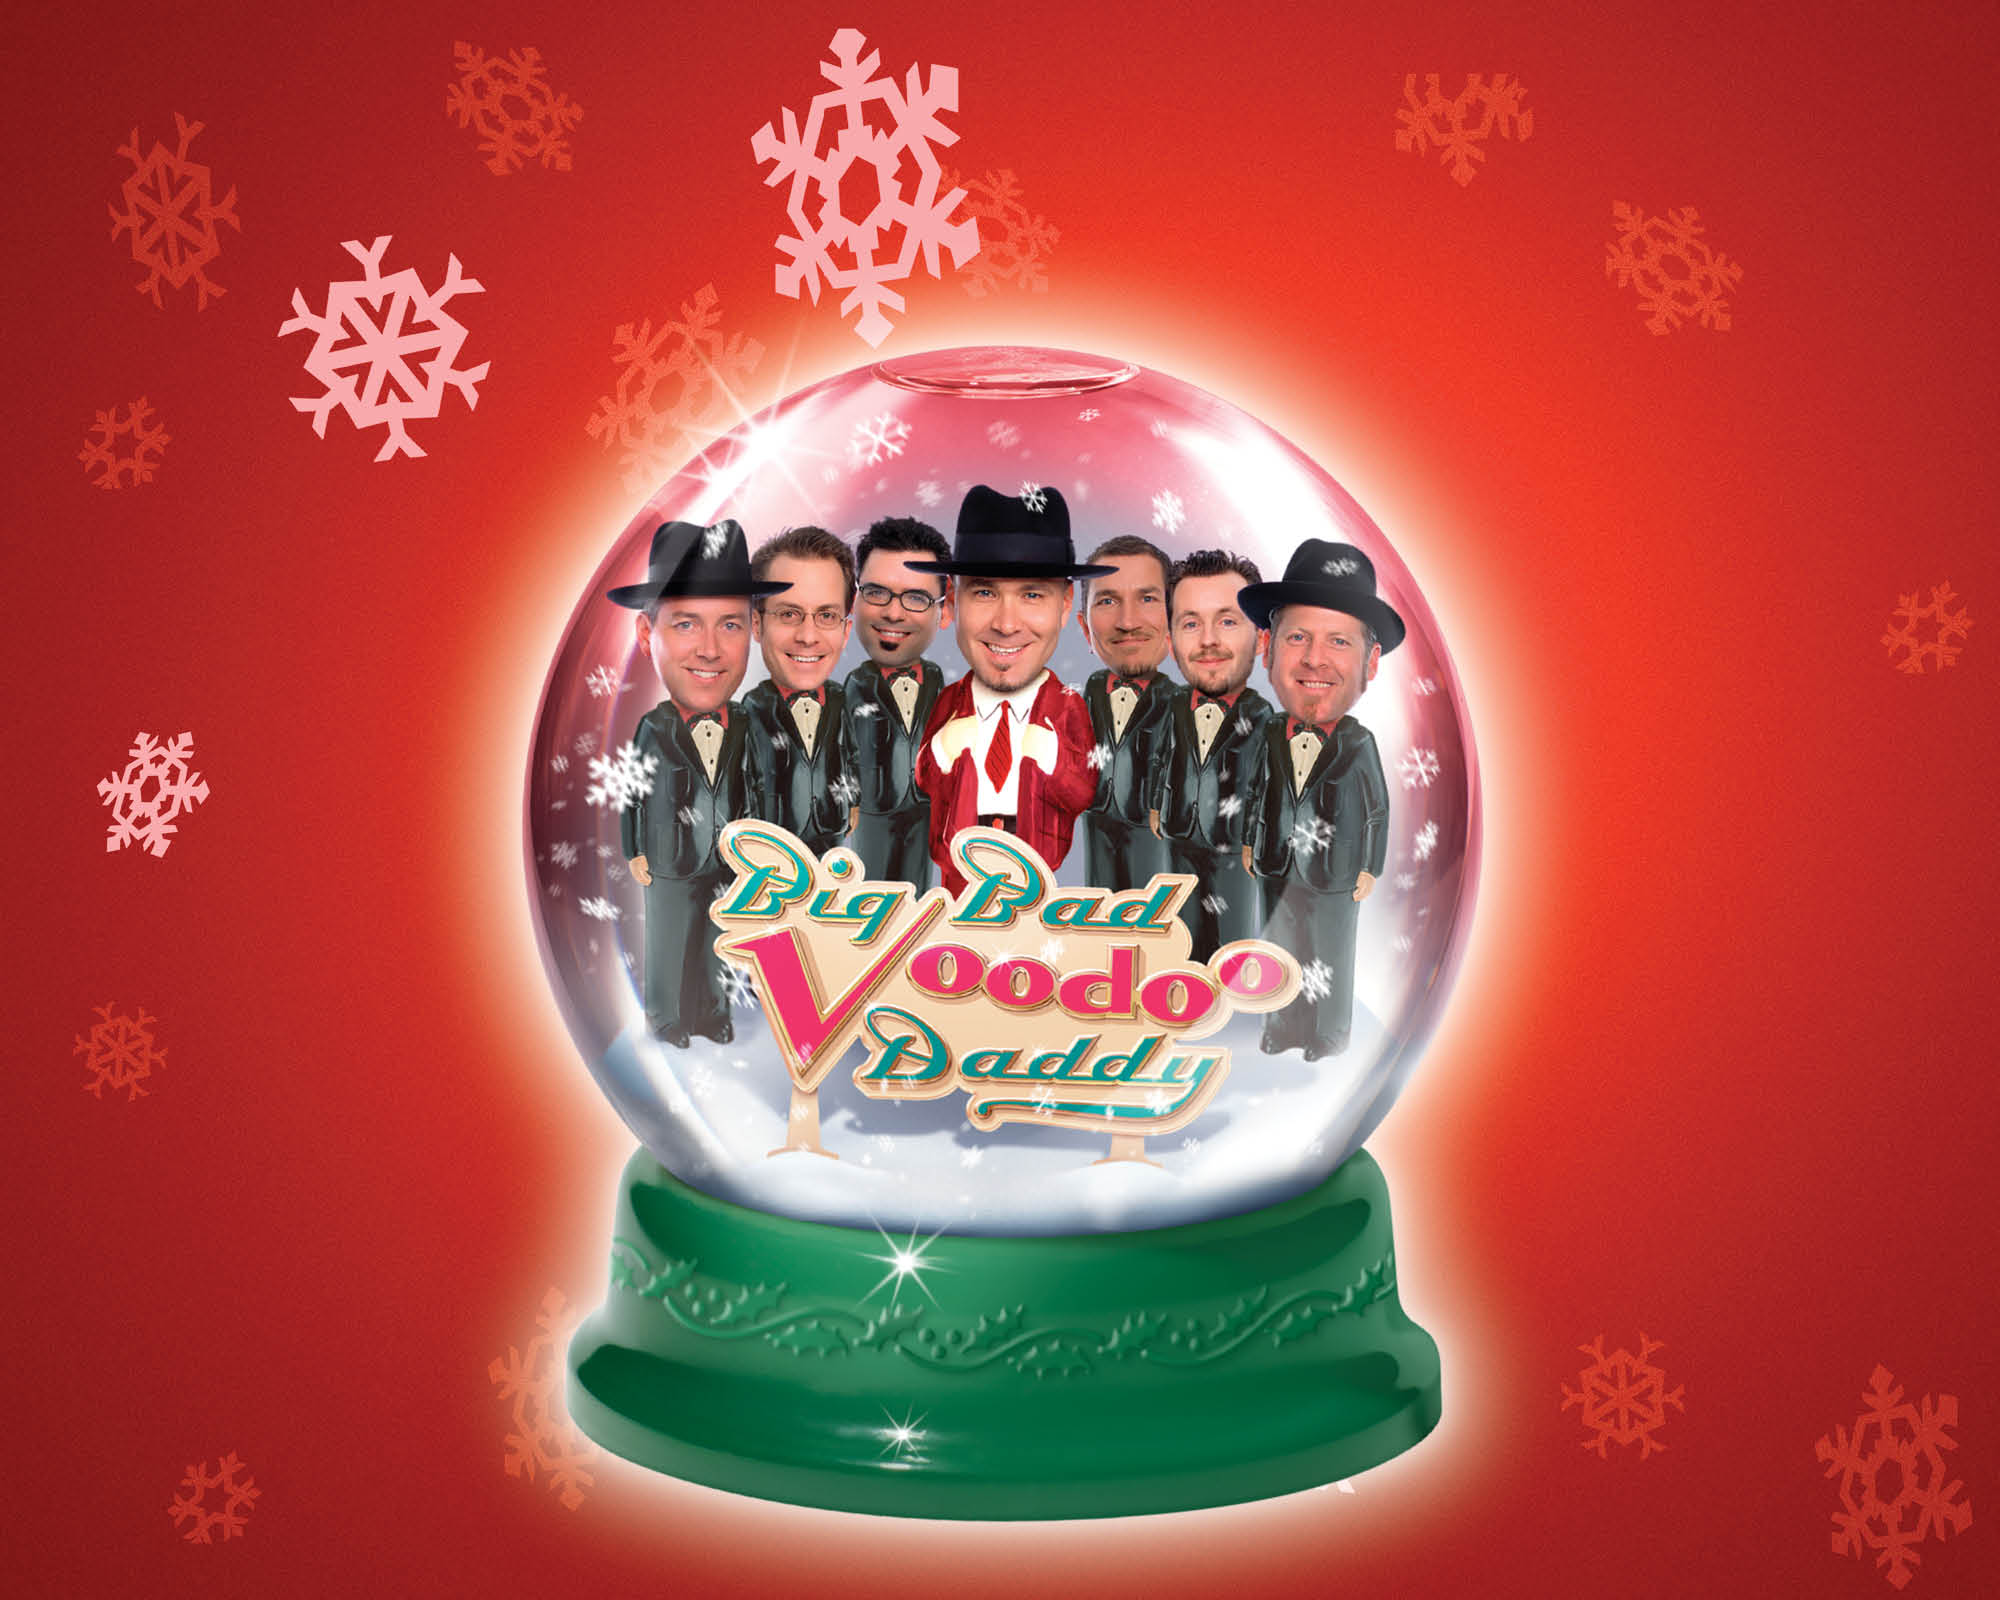 Image for Big Bad Voodoo Daddy’s Wild and Swingin’ Holiday Party!